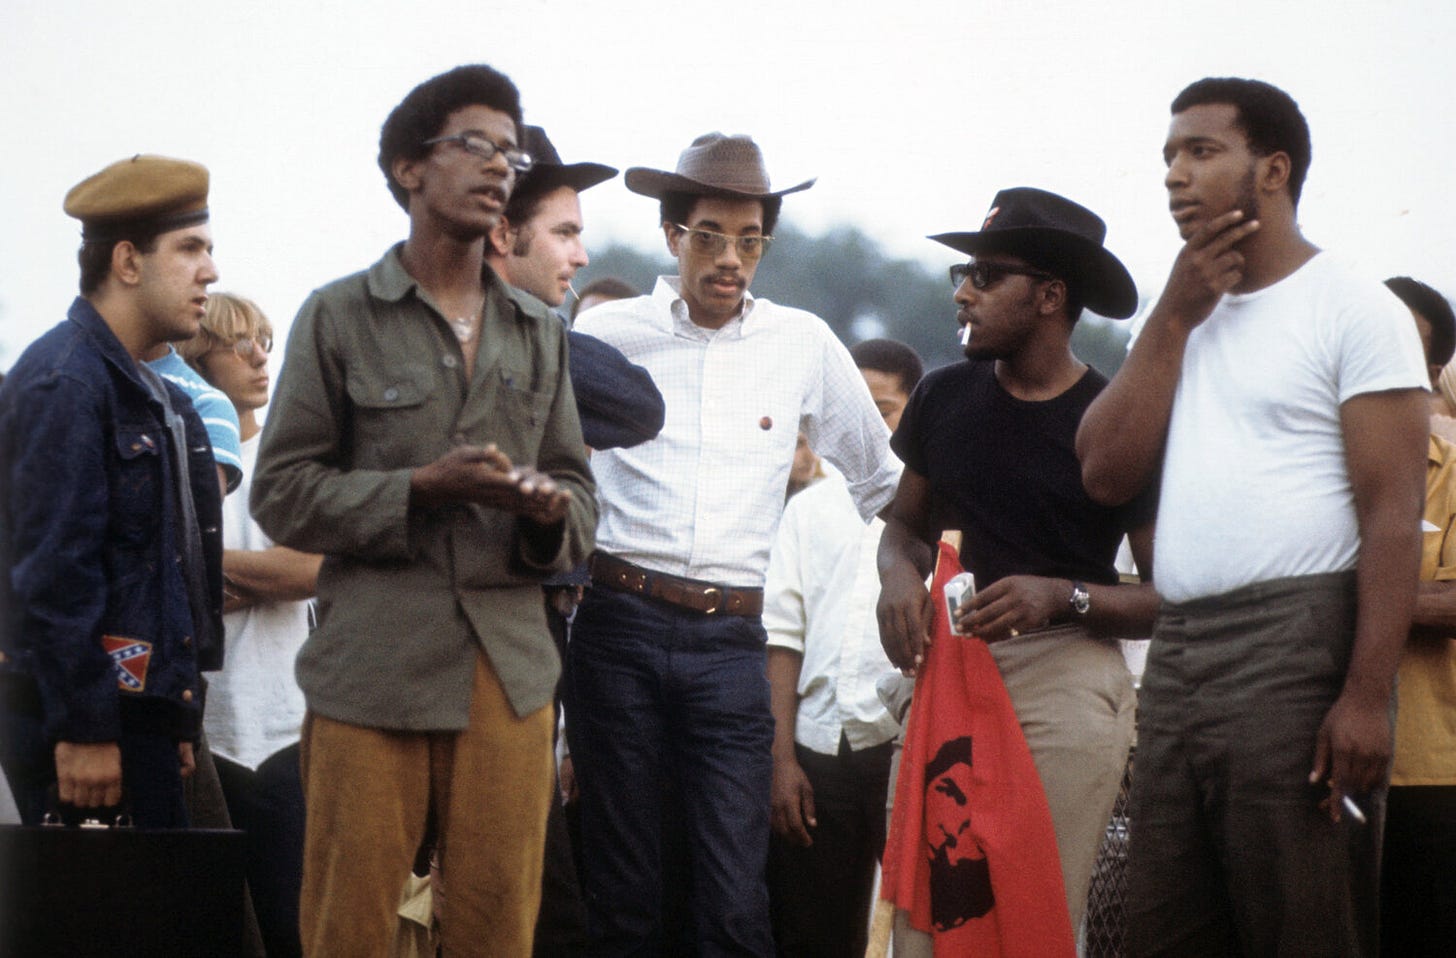 THE FIRST RAINBOW COALITION | Sunday, March 29th, 7PM — Patois Film Festival